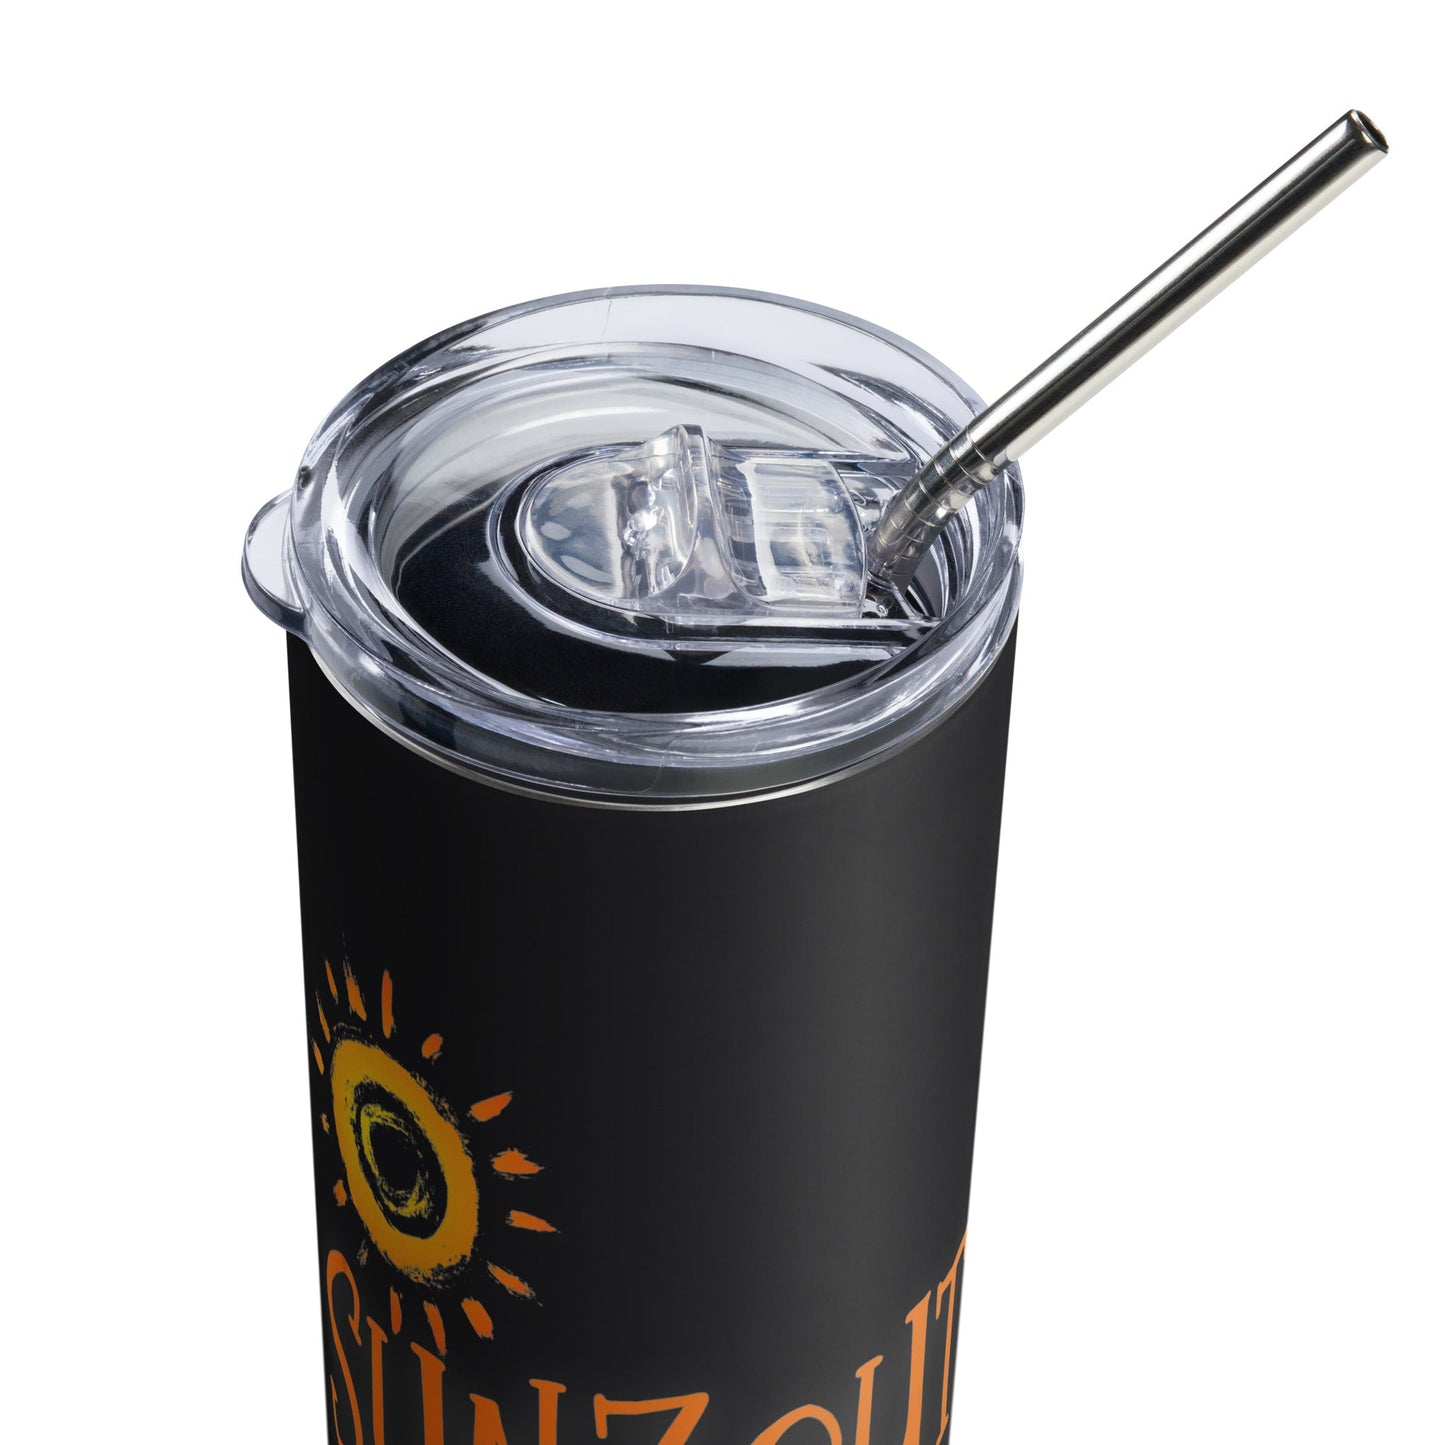 SUNZOUT Funzout Stainless steel tumbler - Sunzout Outdoor Spaces LLC